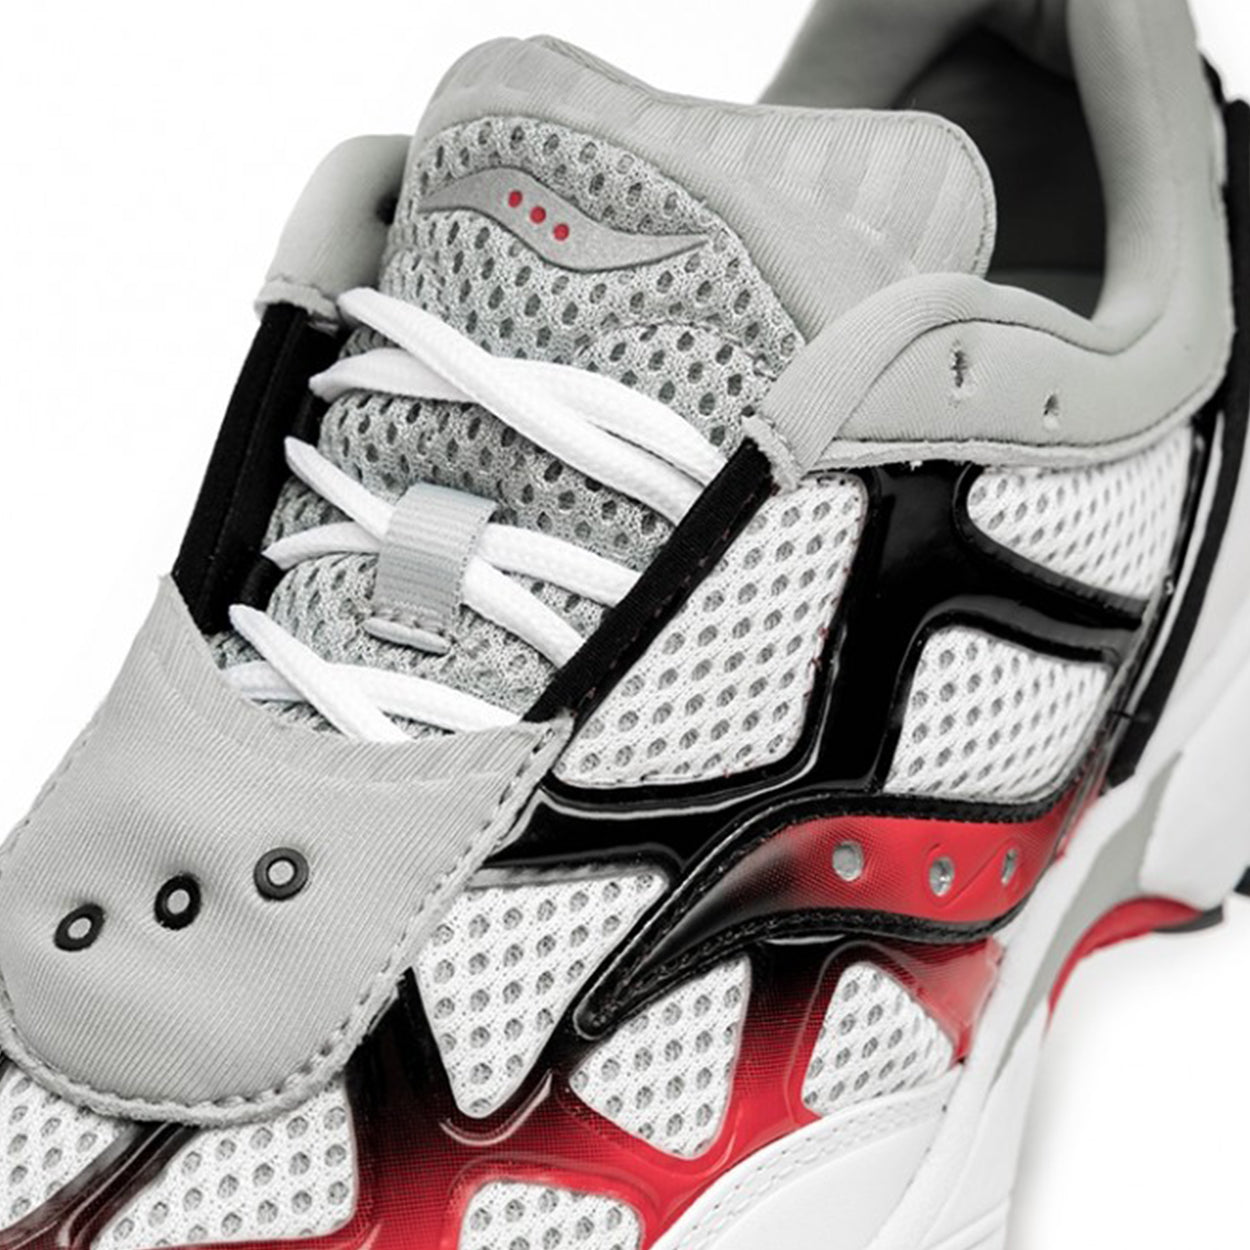 Saucony Grid Web 2000 (White/Grey/Red 